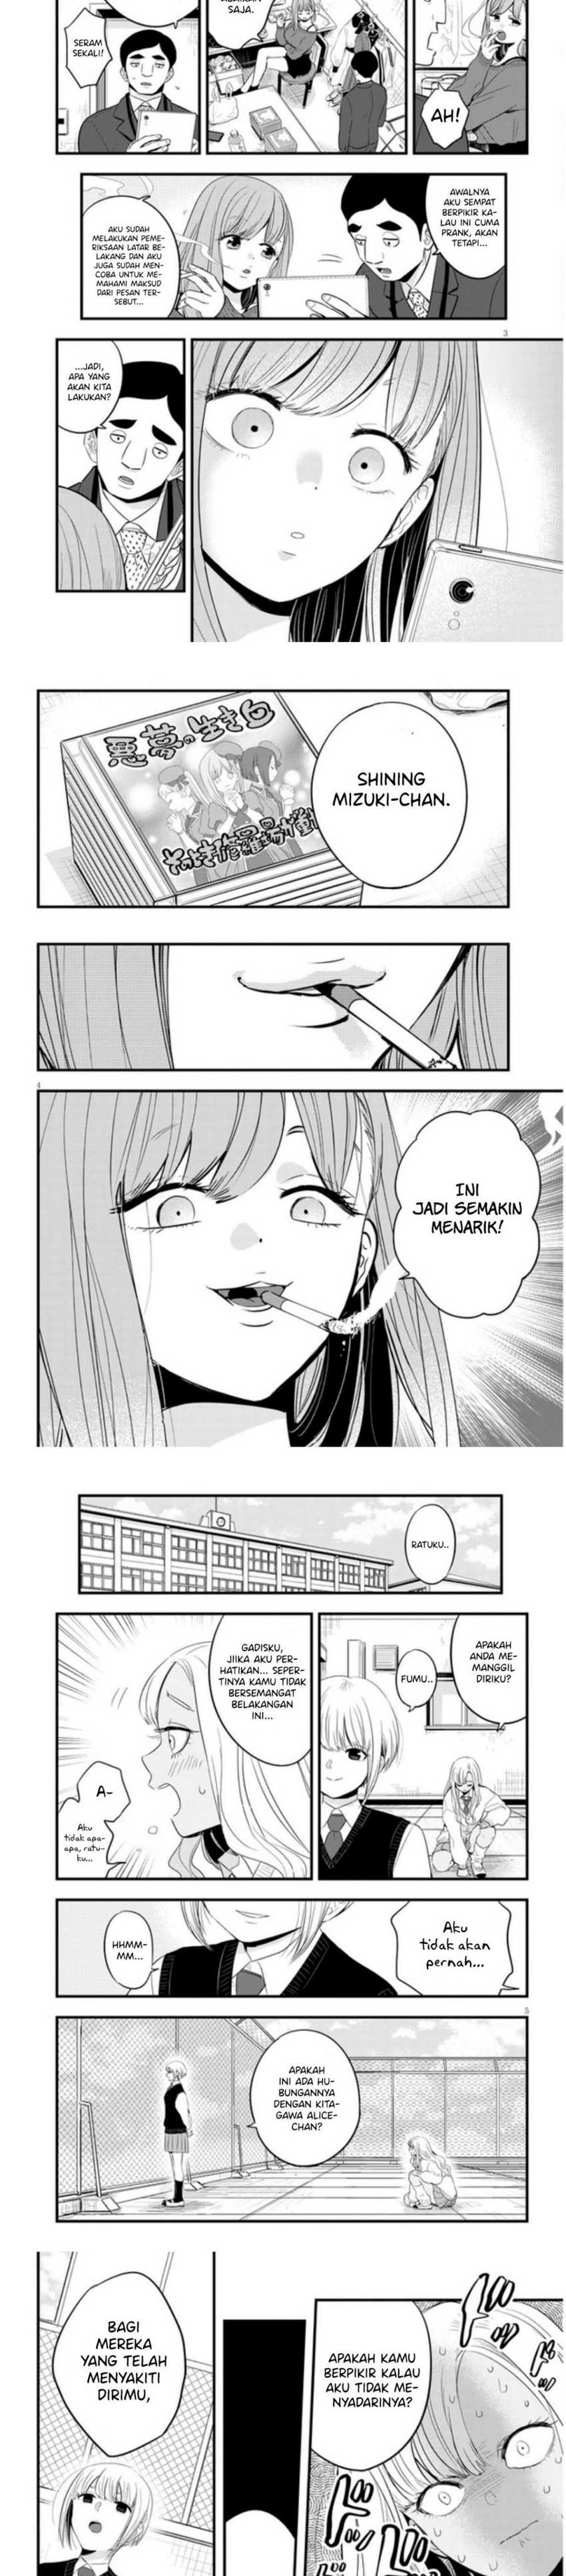 At That Time, The Battle Began (Yandere x Yandere) Chapter 20